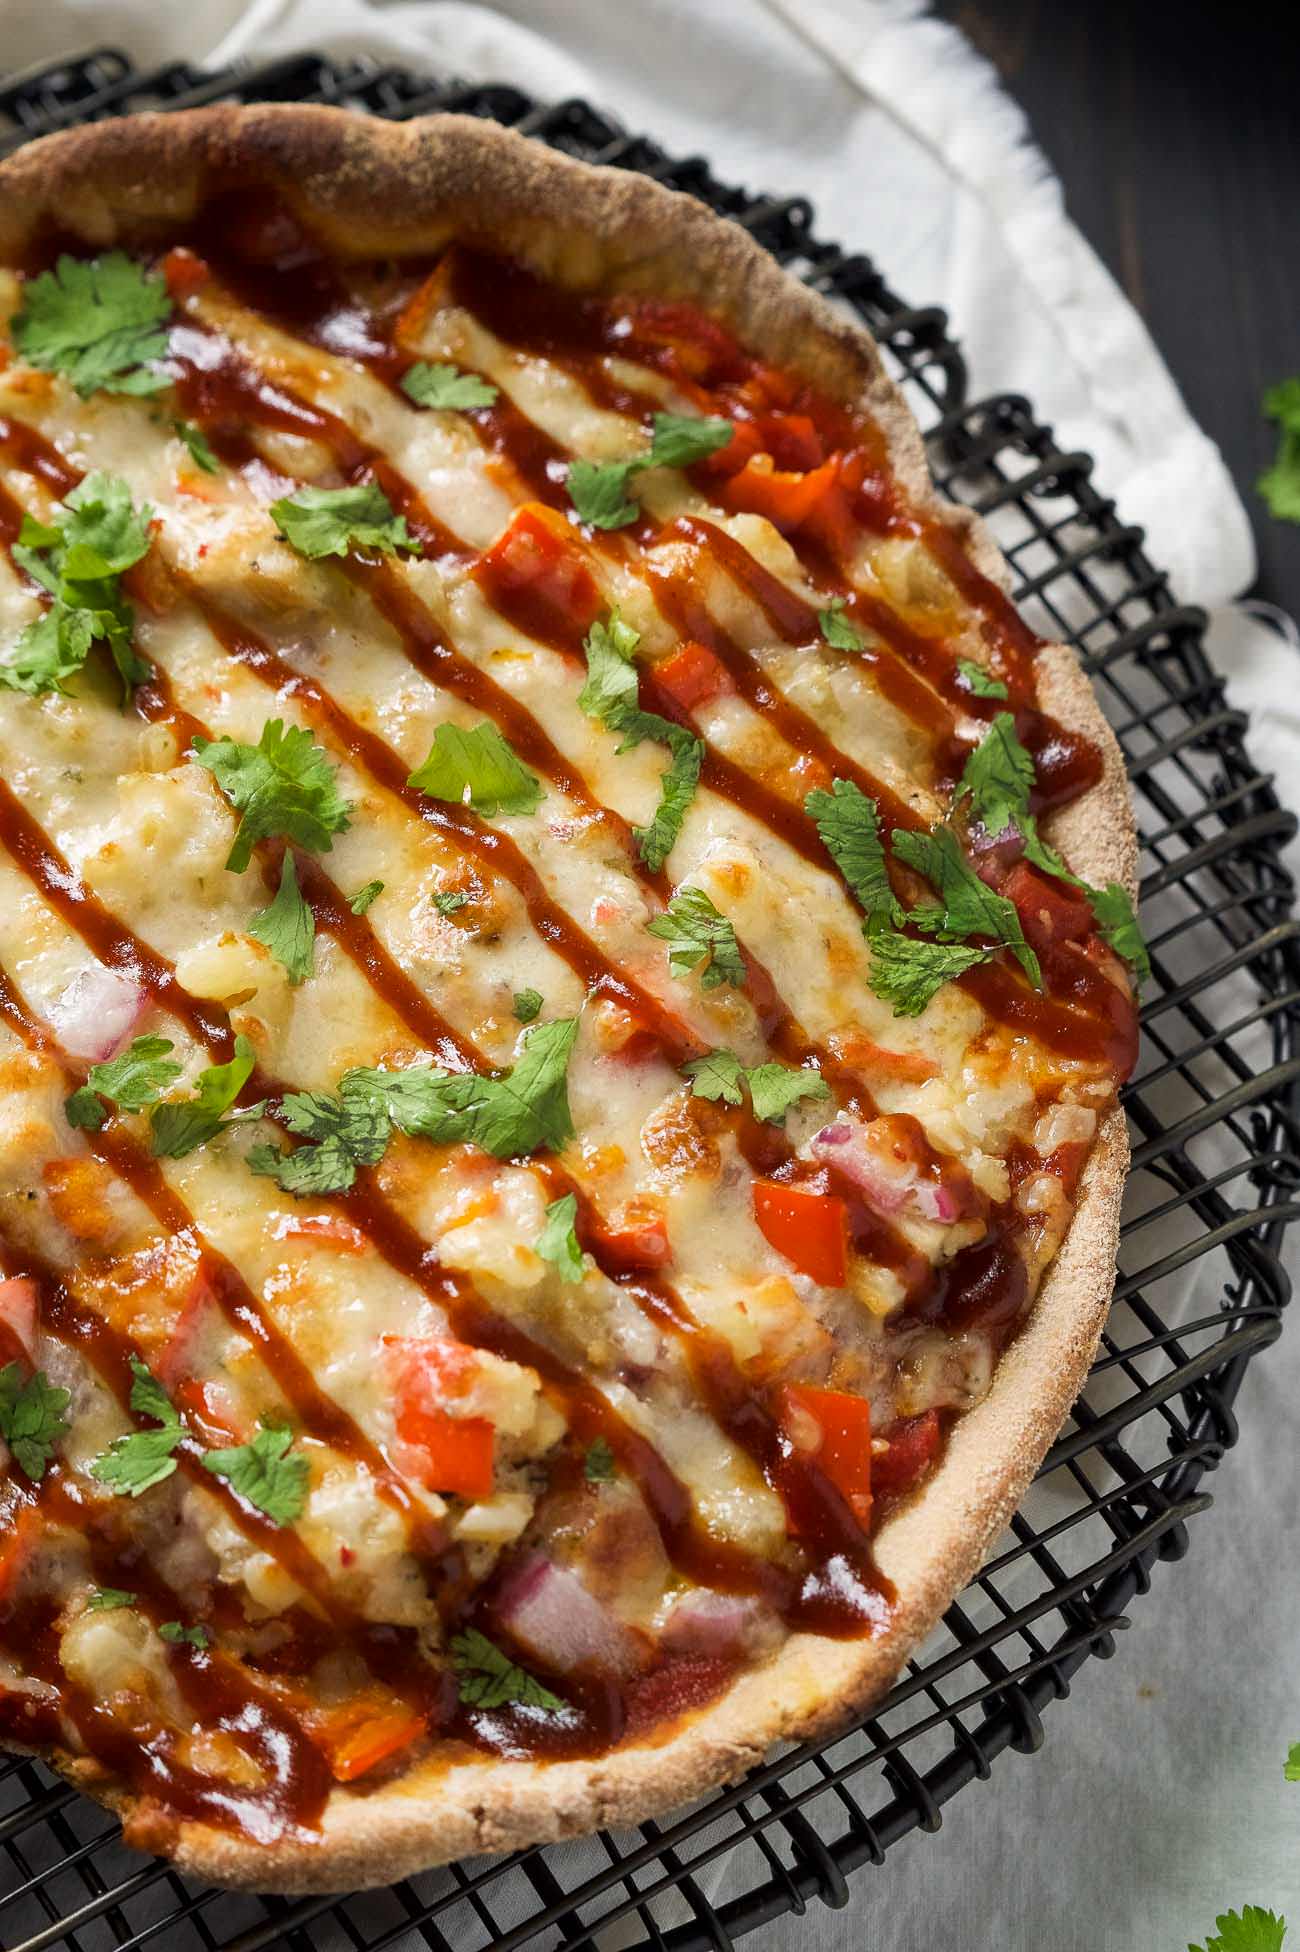 Cast Iron Skillet Chipotle BBQ Chicken Pizza is our new favorite way to make pizza! Sweet and spicy BBQ Chicken pizza has a crispy crust thanks to the cast iron skillet!